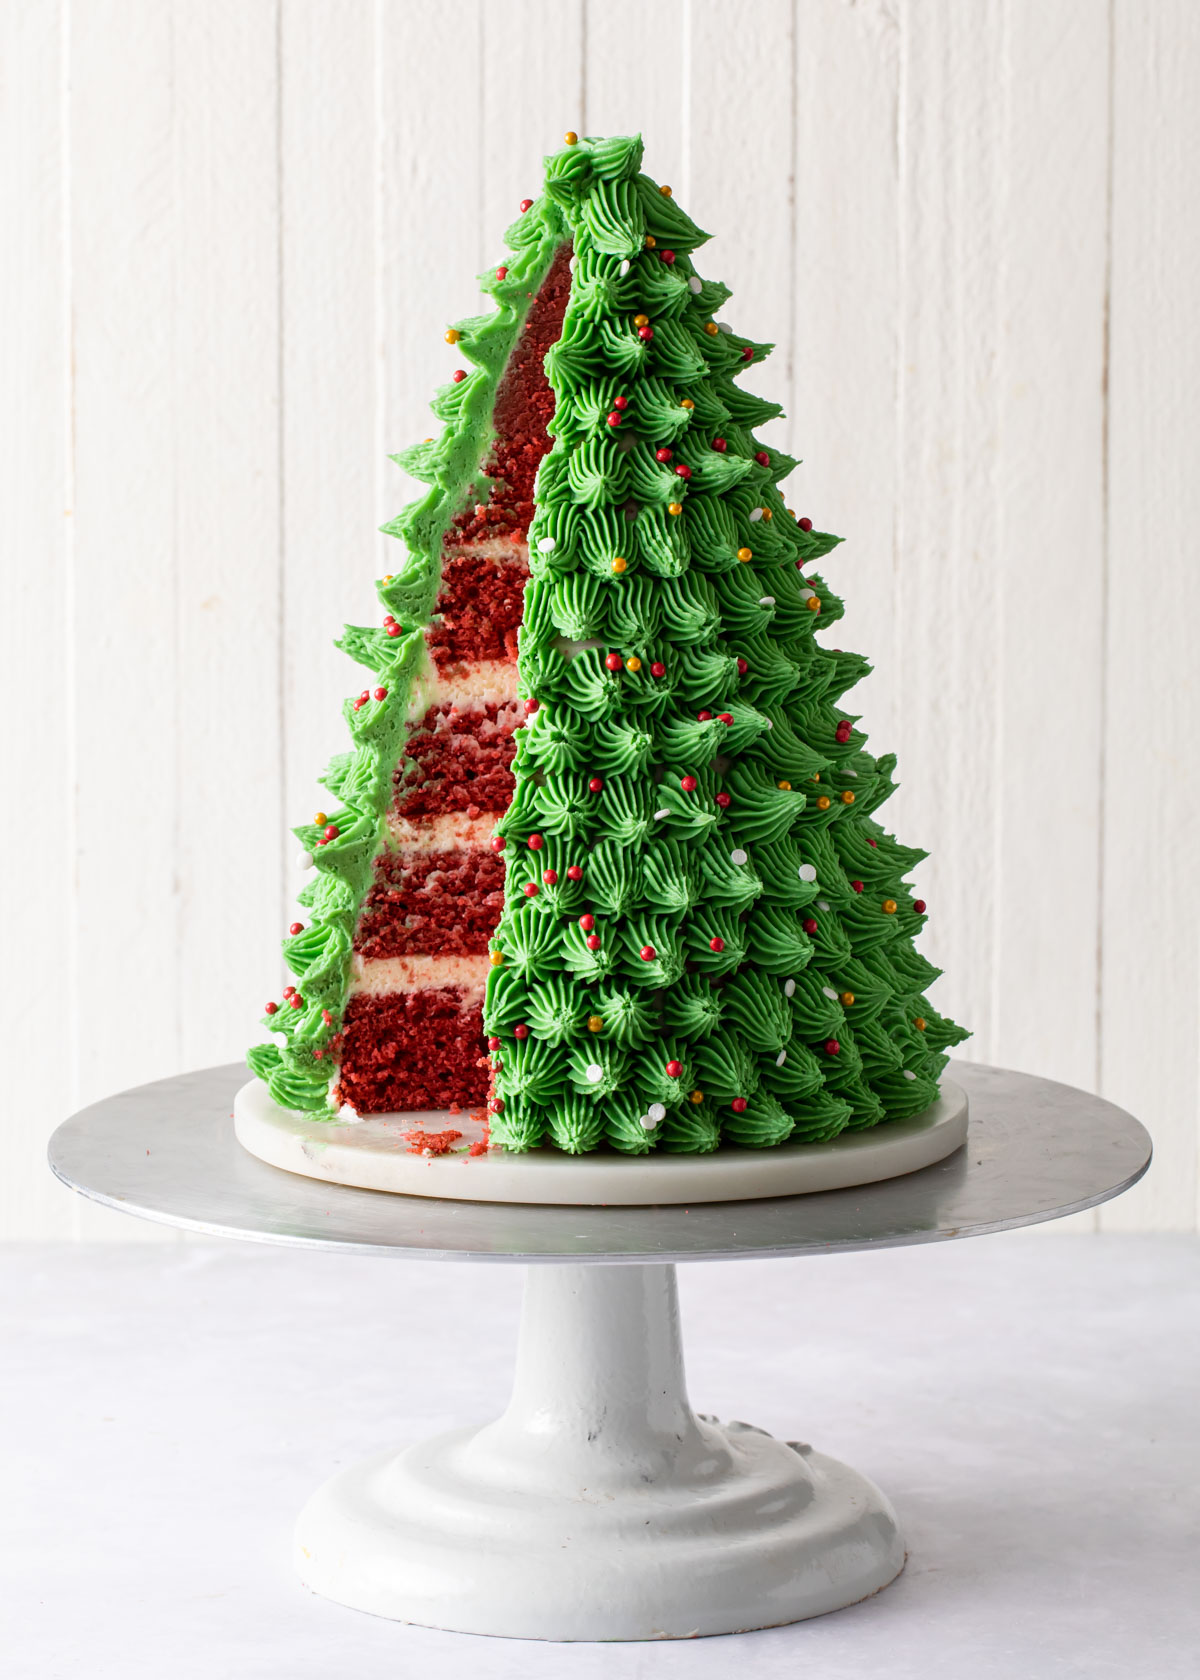 A red velvet cake carved and decorated to look like a 3D Christmas Tree 
